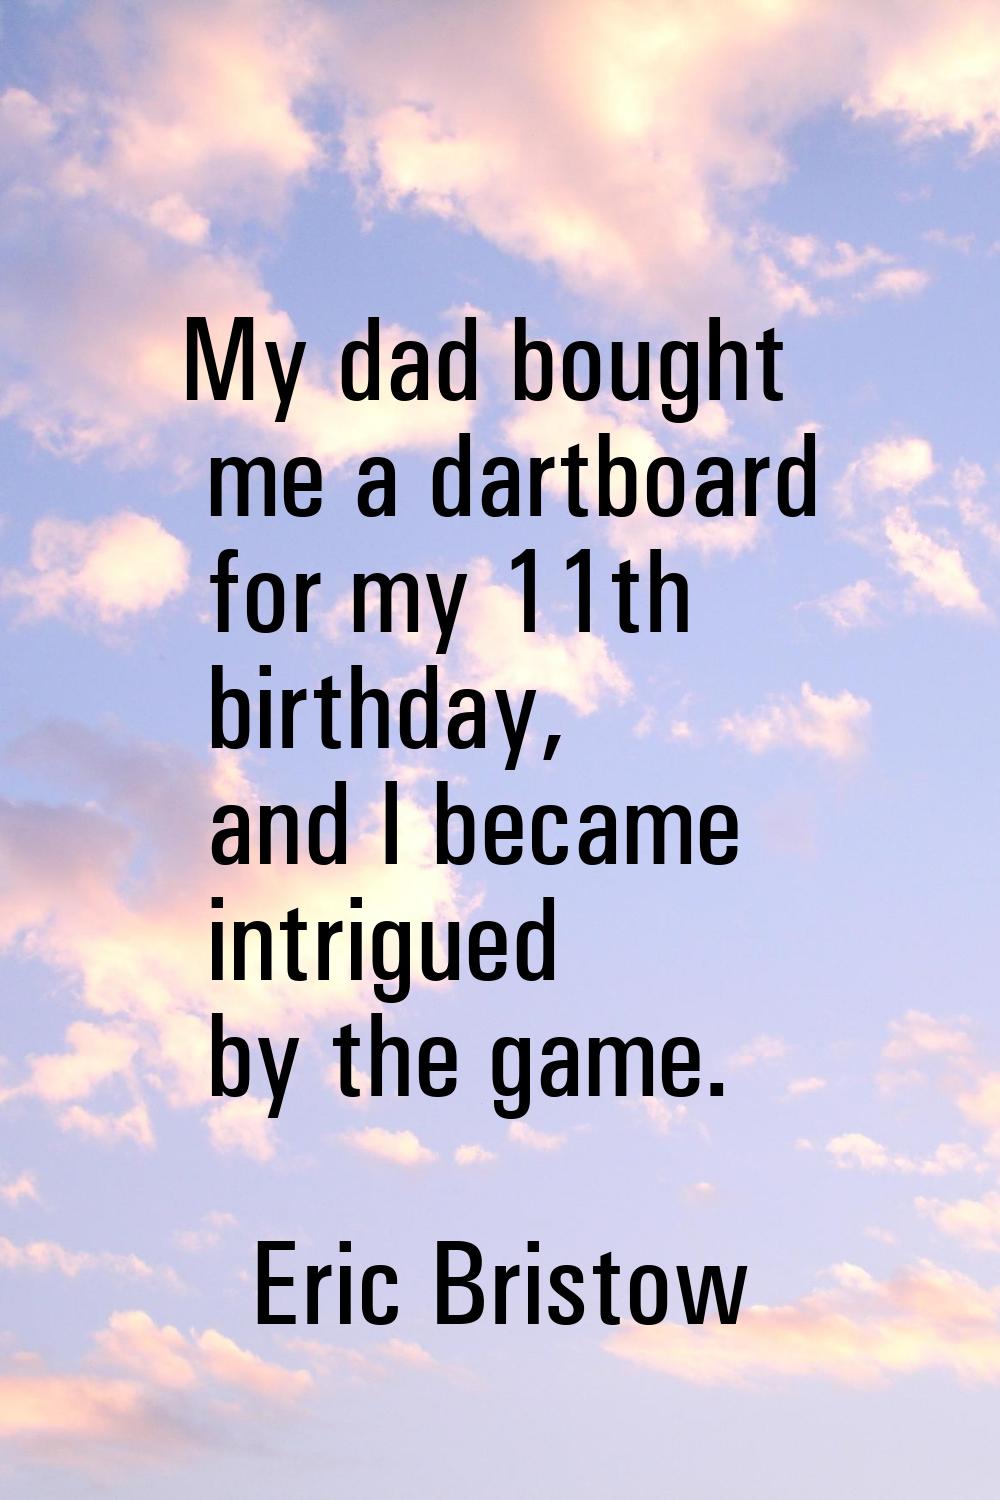 My dad bought me a dartboard for my 11th birthday, and I became intrigued by the game.